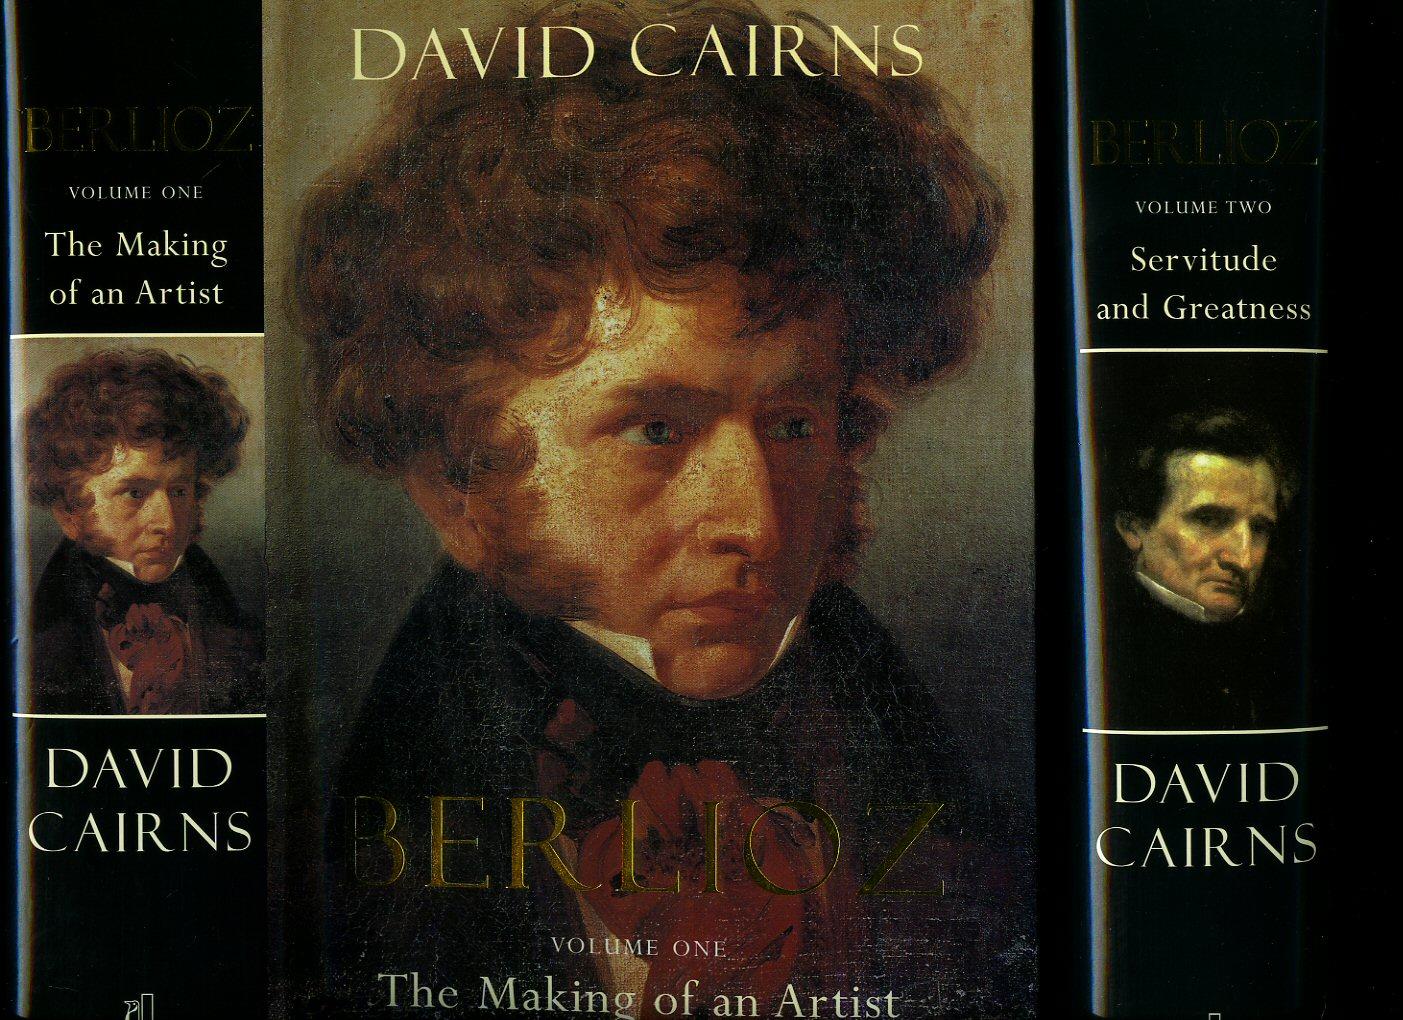 Berlioz; Volume One: The Making of an Artist 1803-1832; and Volume Two: Servitude and Greatness 1832-1869 (Two Volumes) - Cairns, David (Hector Berlioz 11 December 1803 - 8 March 1869, was a French Romantic composer, best known for his compositions Symphonie fantastique and Grande messe des morts (Requiem).